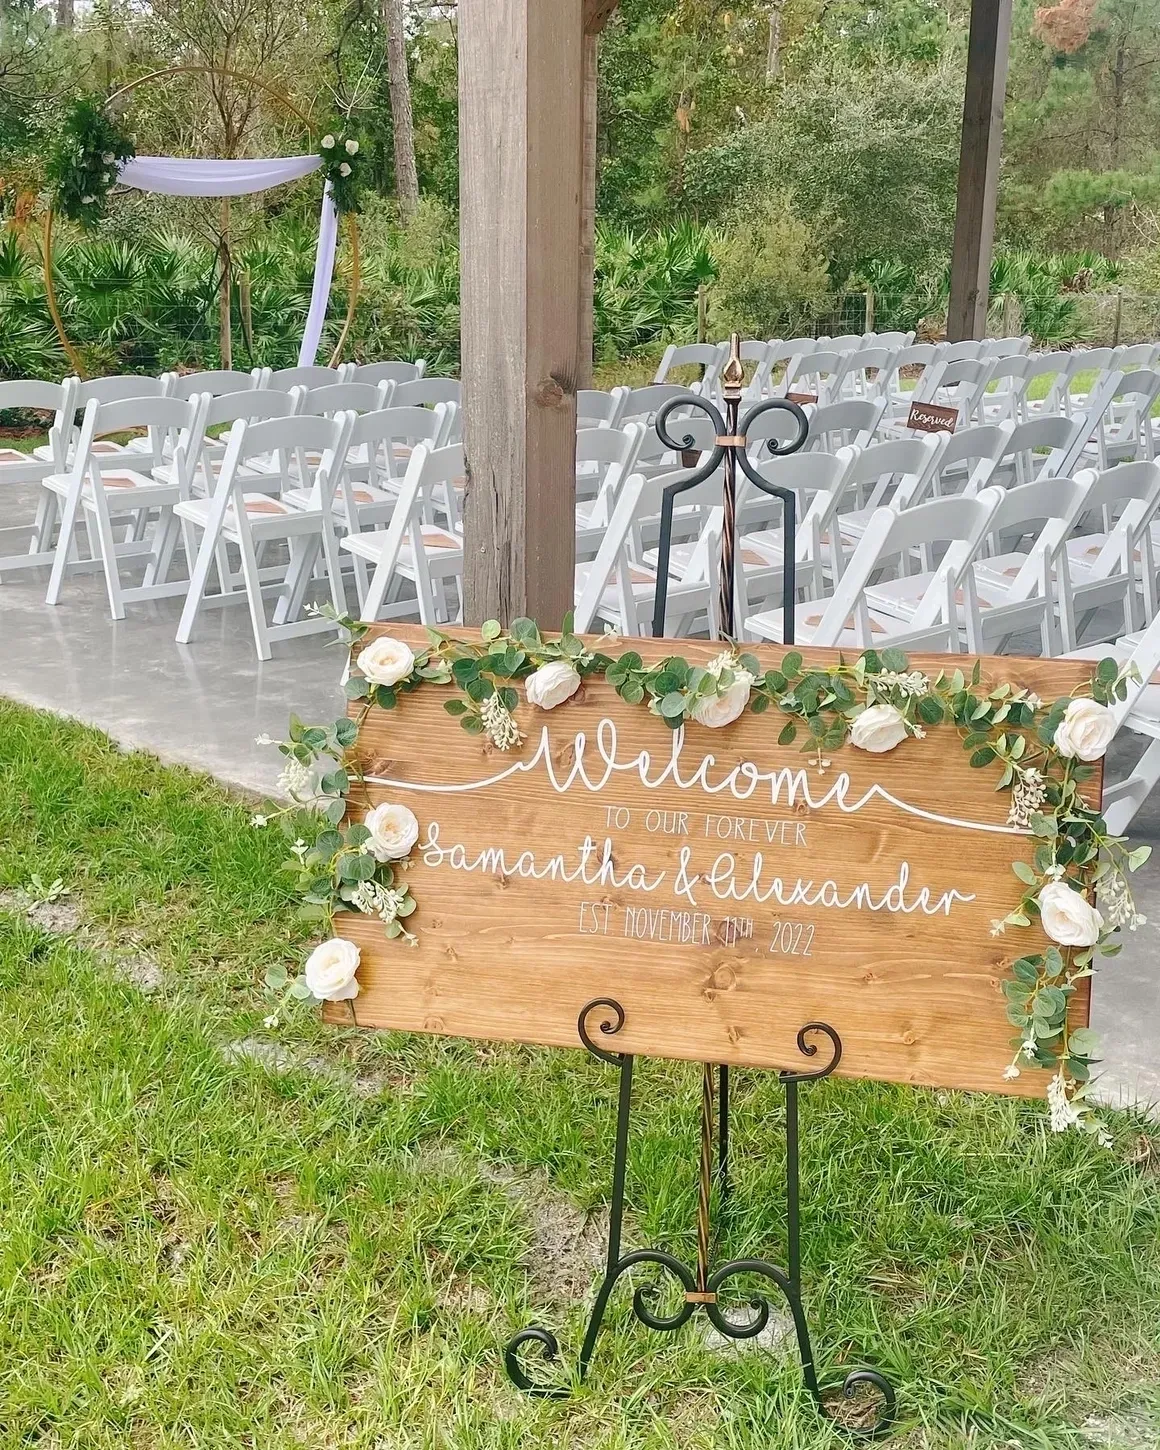 A wooden sign with white flowers on it